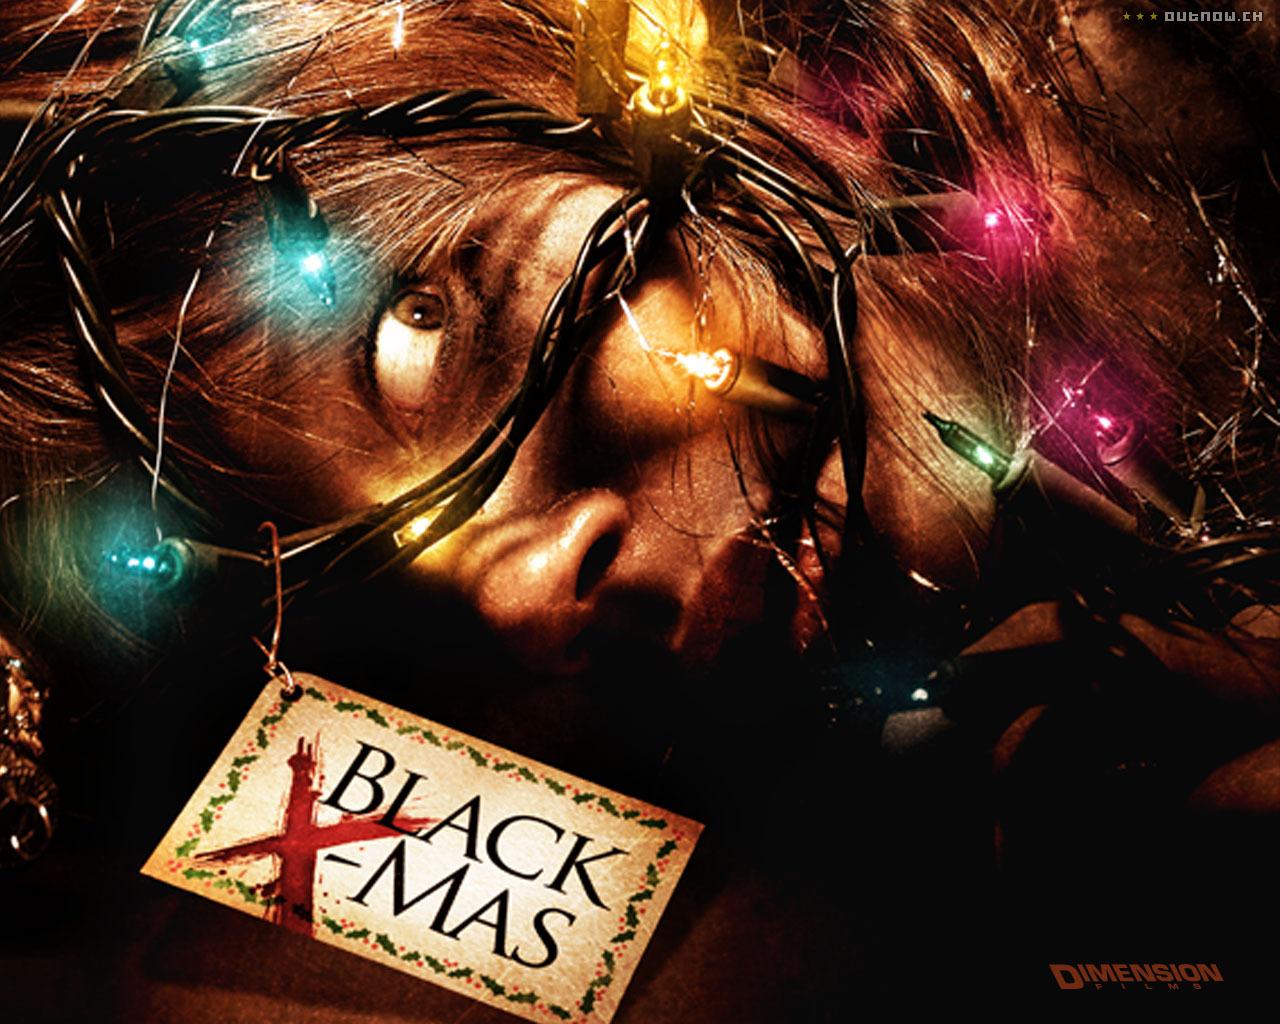 Black Christmas Movie Wallpapers - Wallpaper Cave